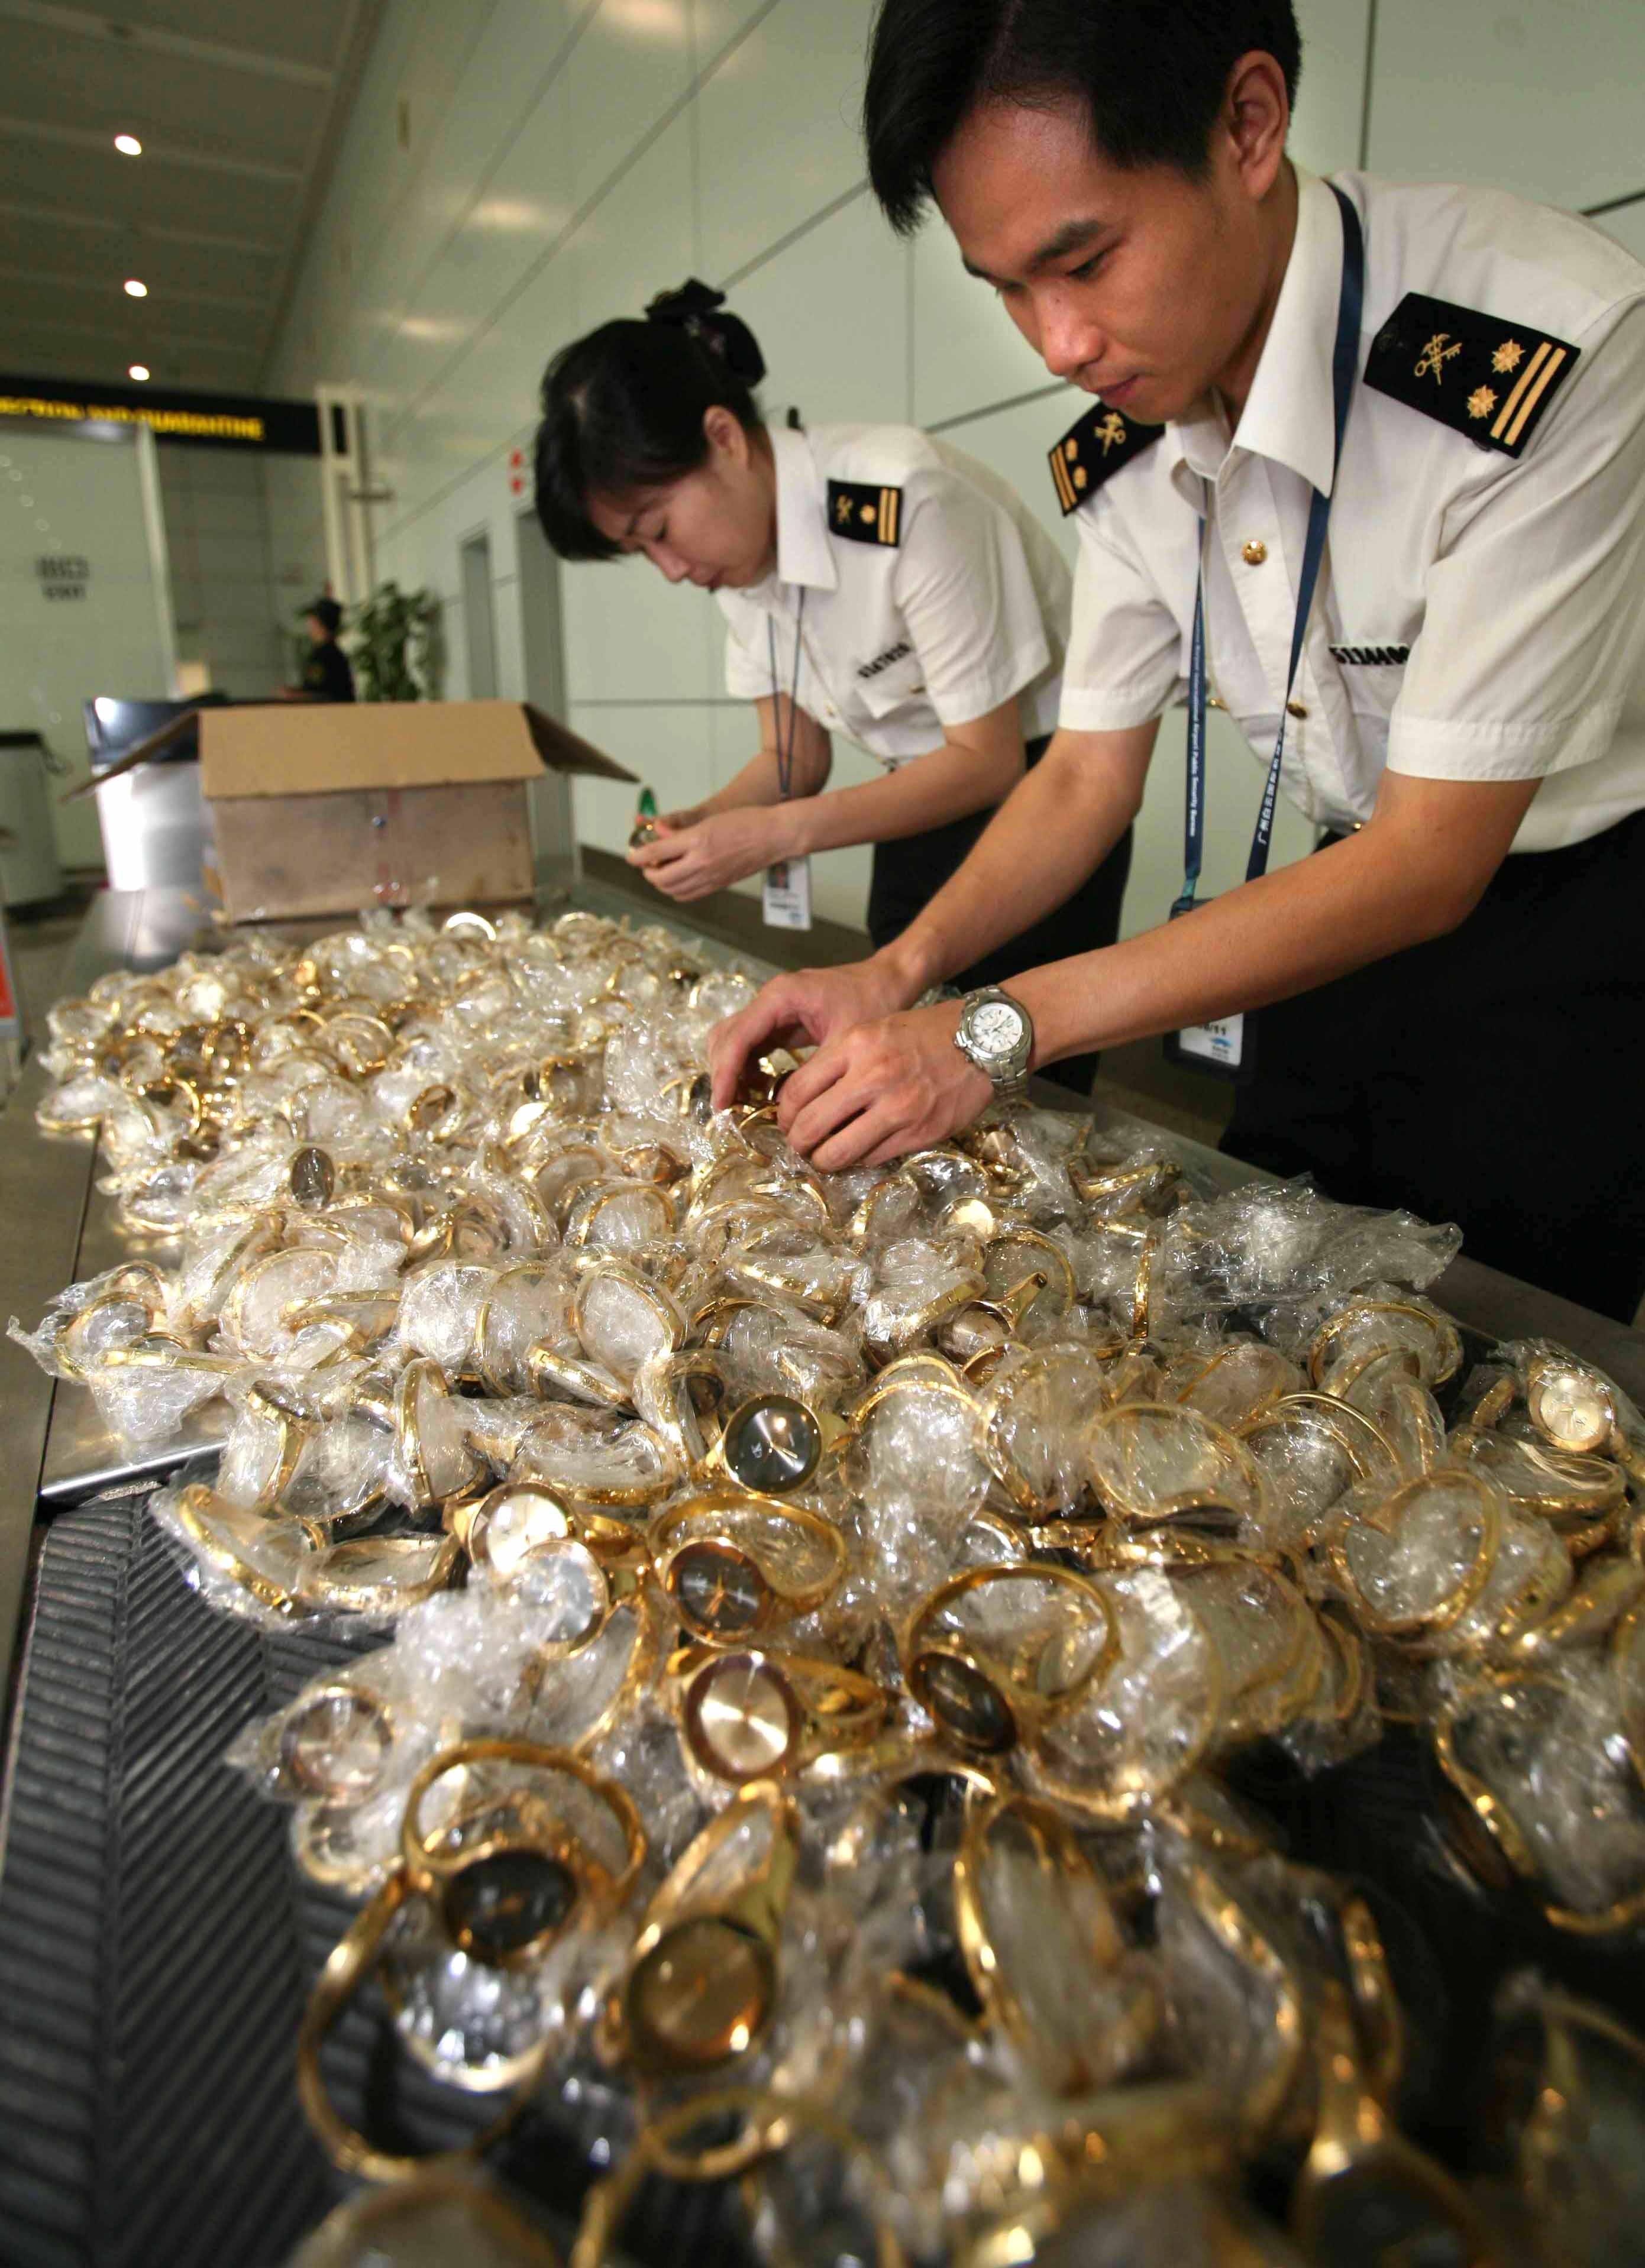 Guangzhou Baiyun Airport Customs House Intercepted and Captured 480 Watches Suspected of Infringing on    CK    through Passenger Inspection